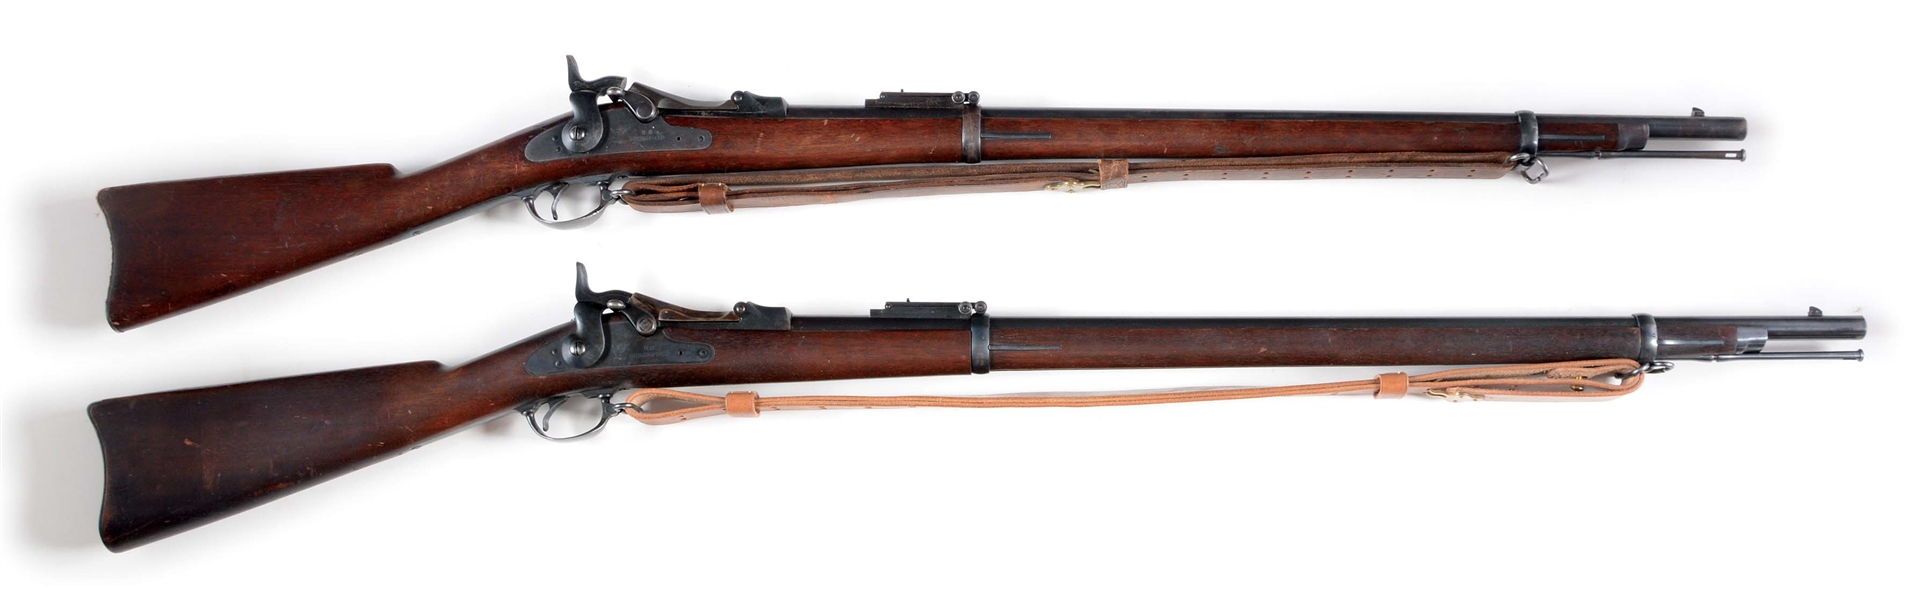 (A) LOT OF 2: SPRINGFIELD 1884 TRAPDOOR AND 1884 CADET TRAPDOOR RIFLE